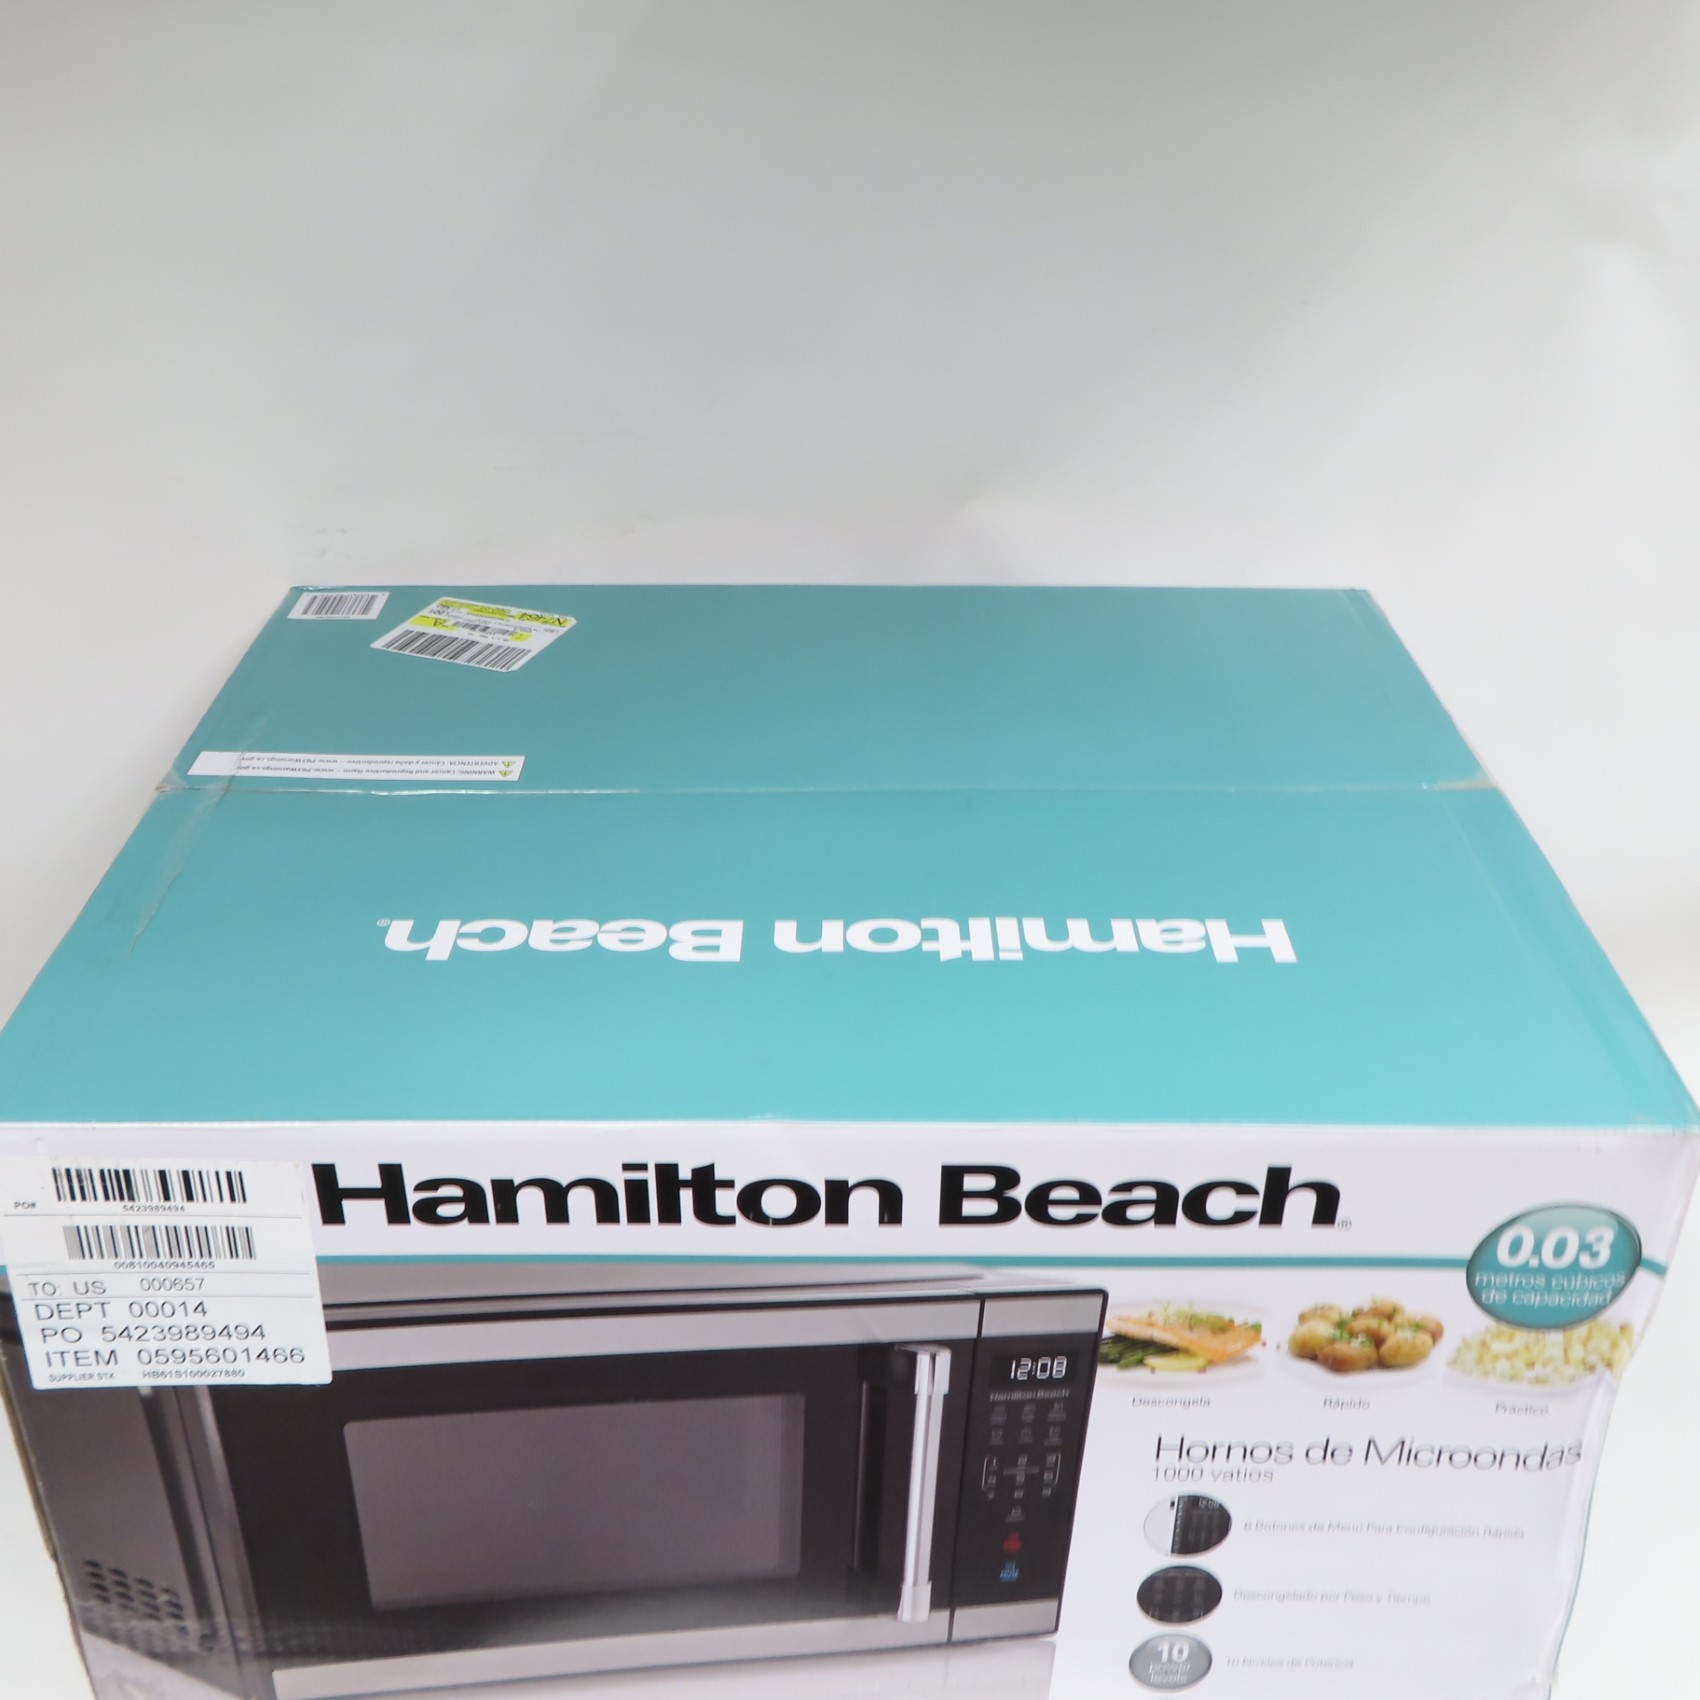 Hamilton Beach HB61S100027880 Countertop Microwave Oven (Local Pick-Up Only)